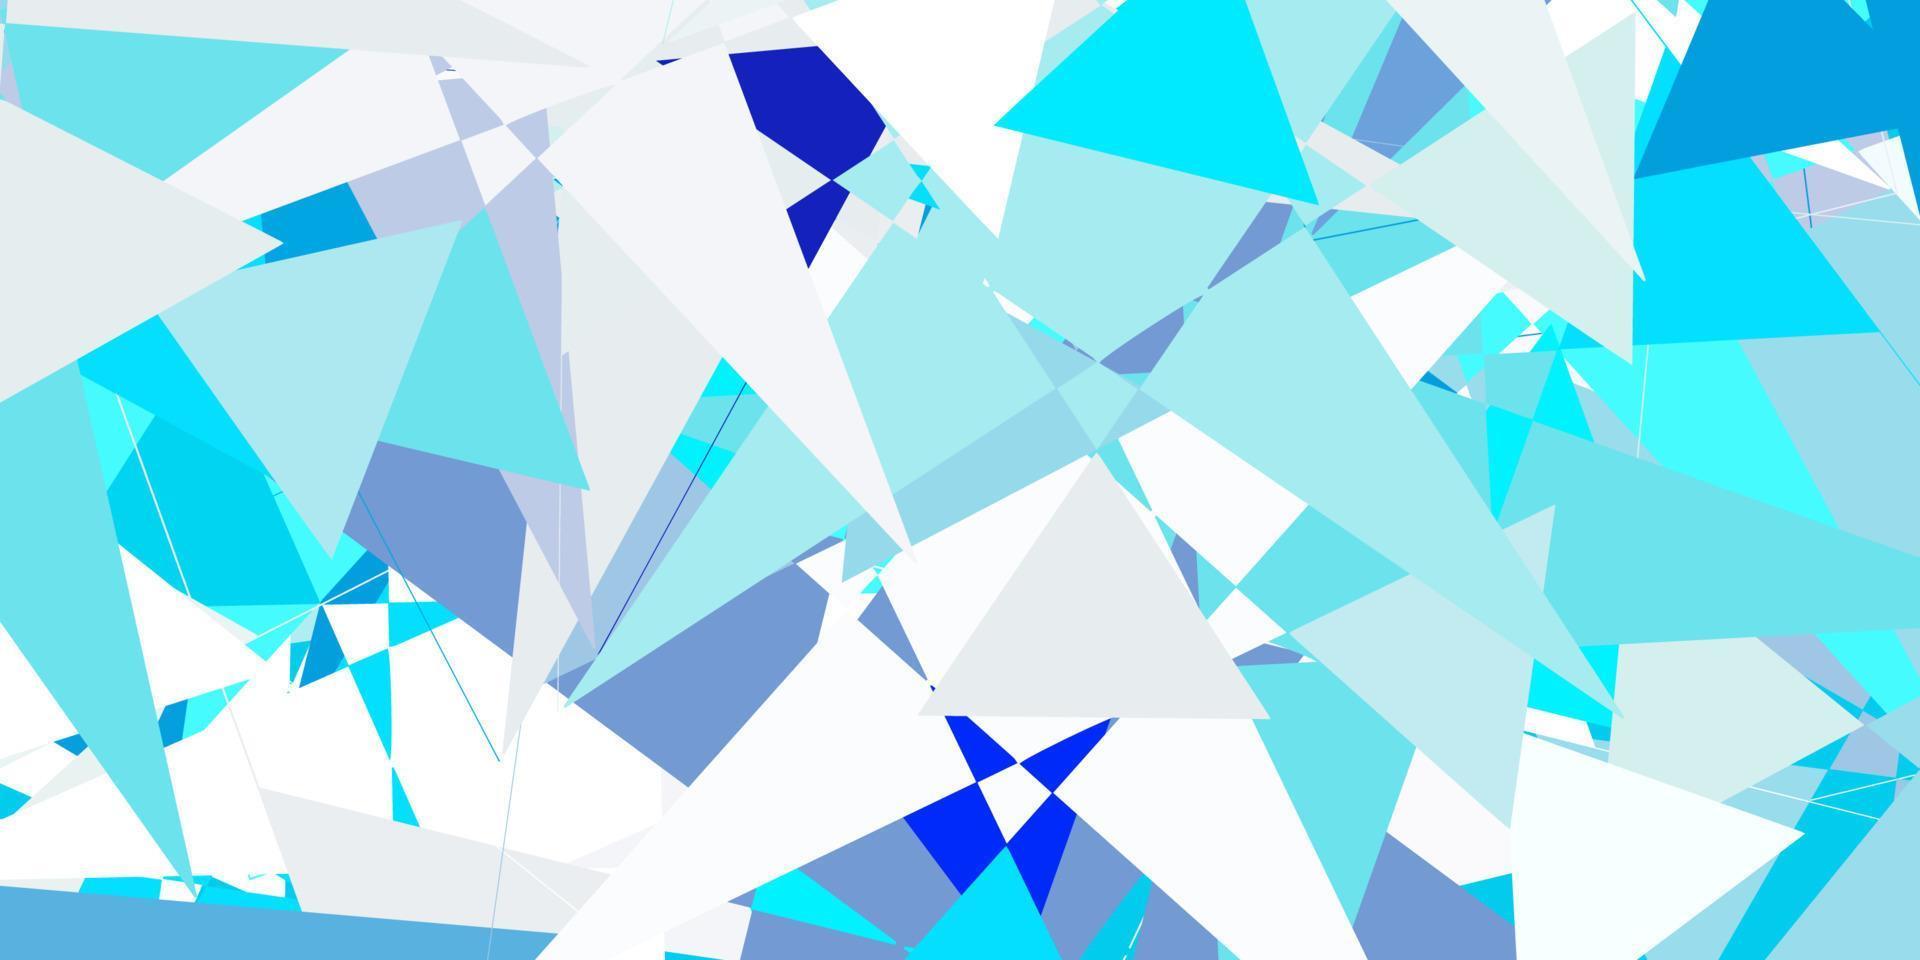 Light BLUE vector pattern with polygonal shapes.